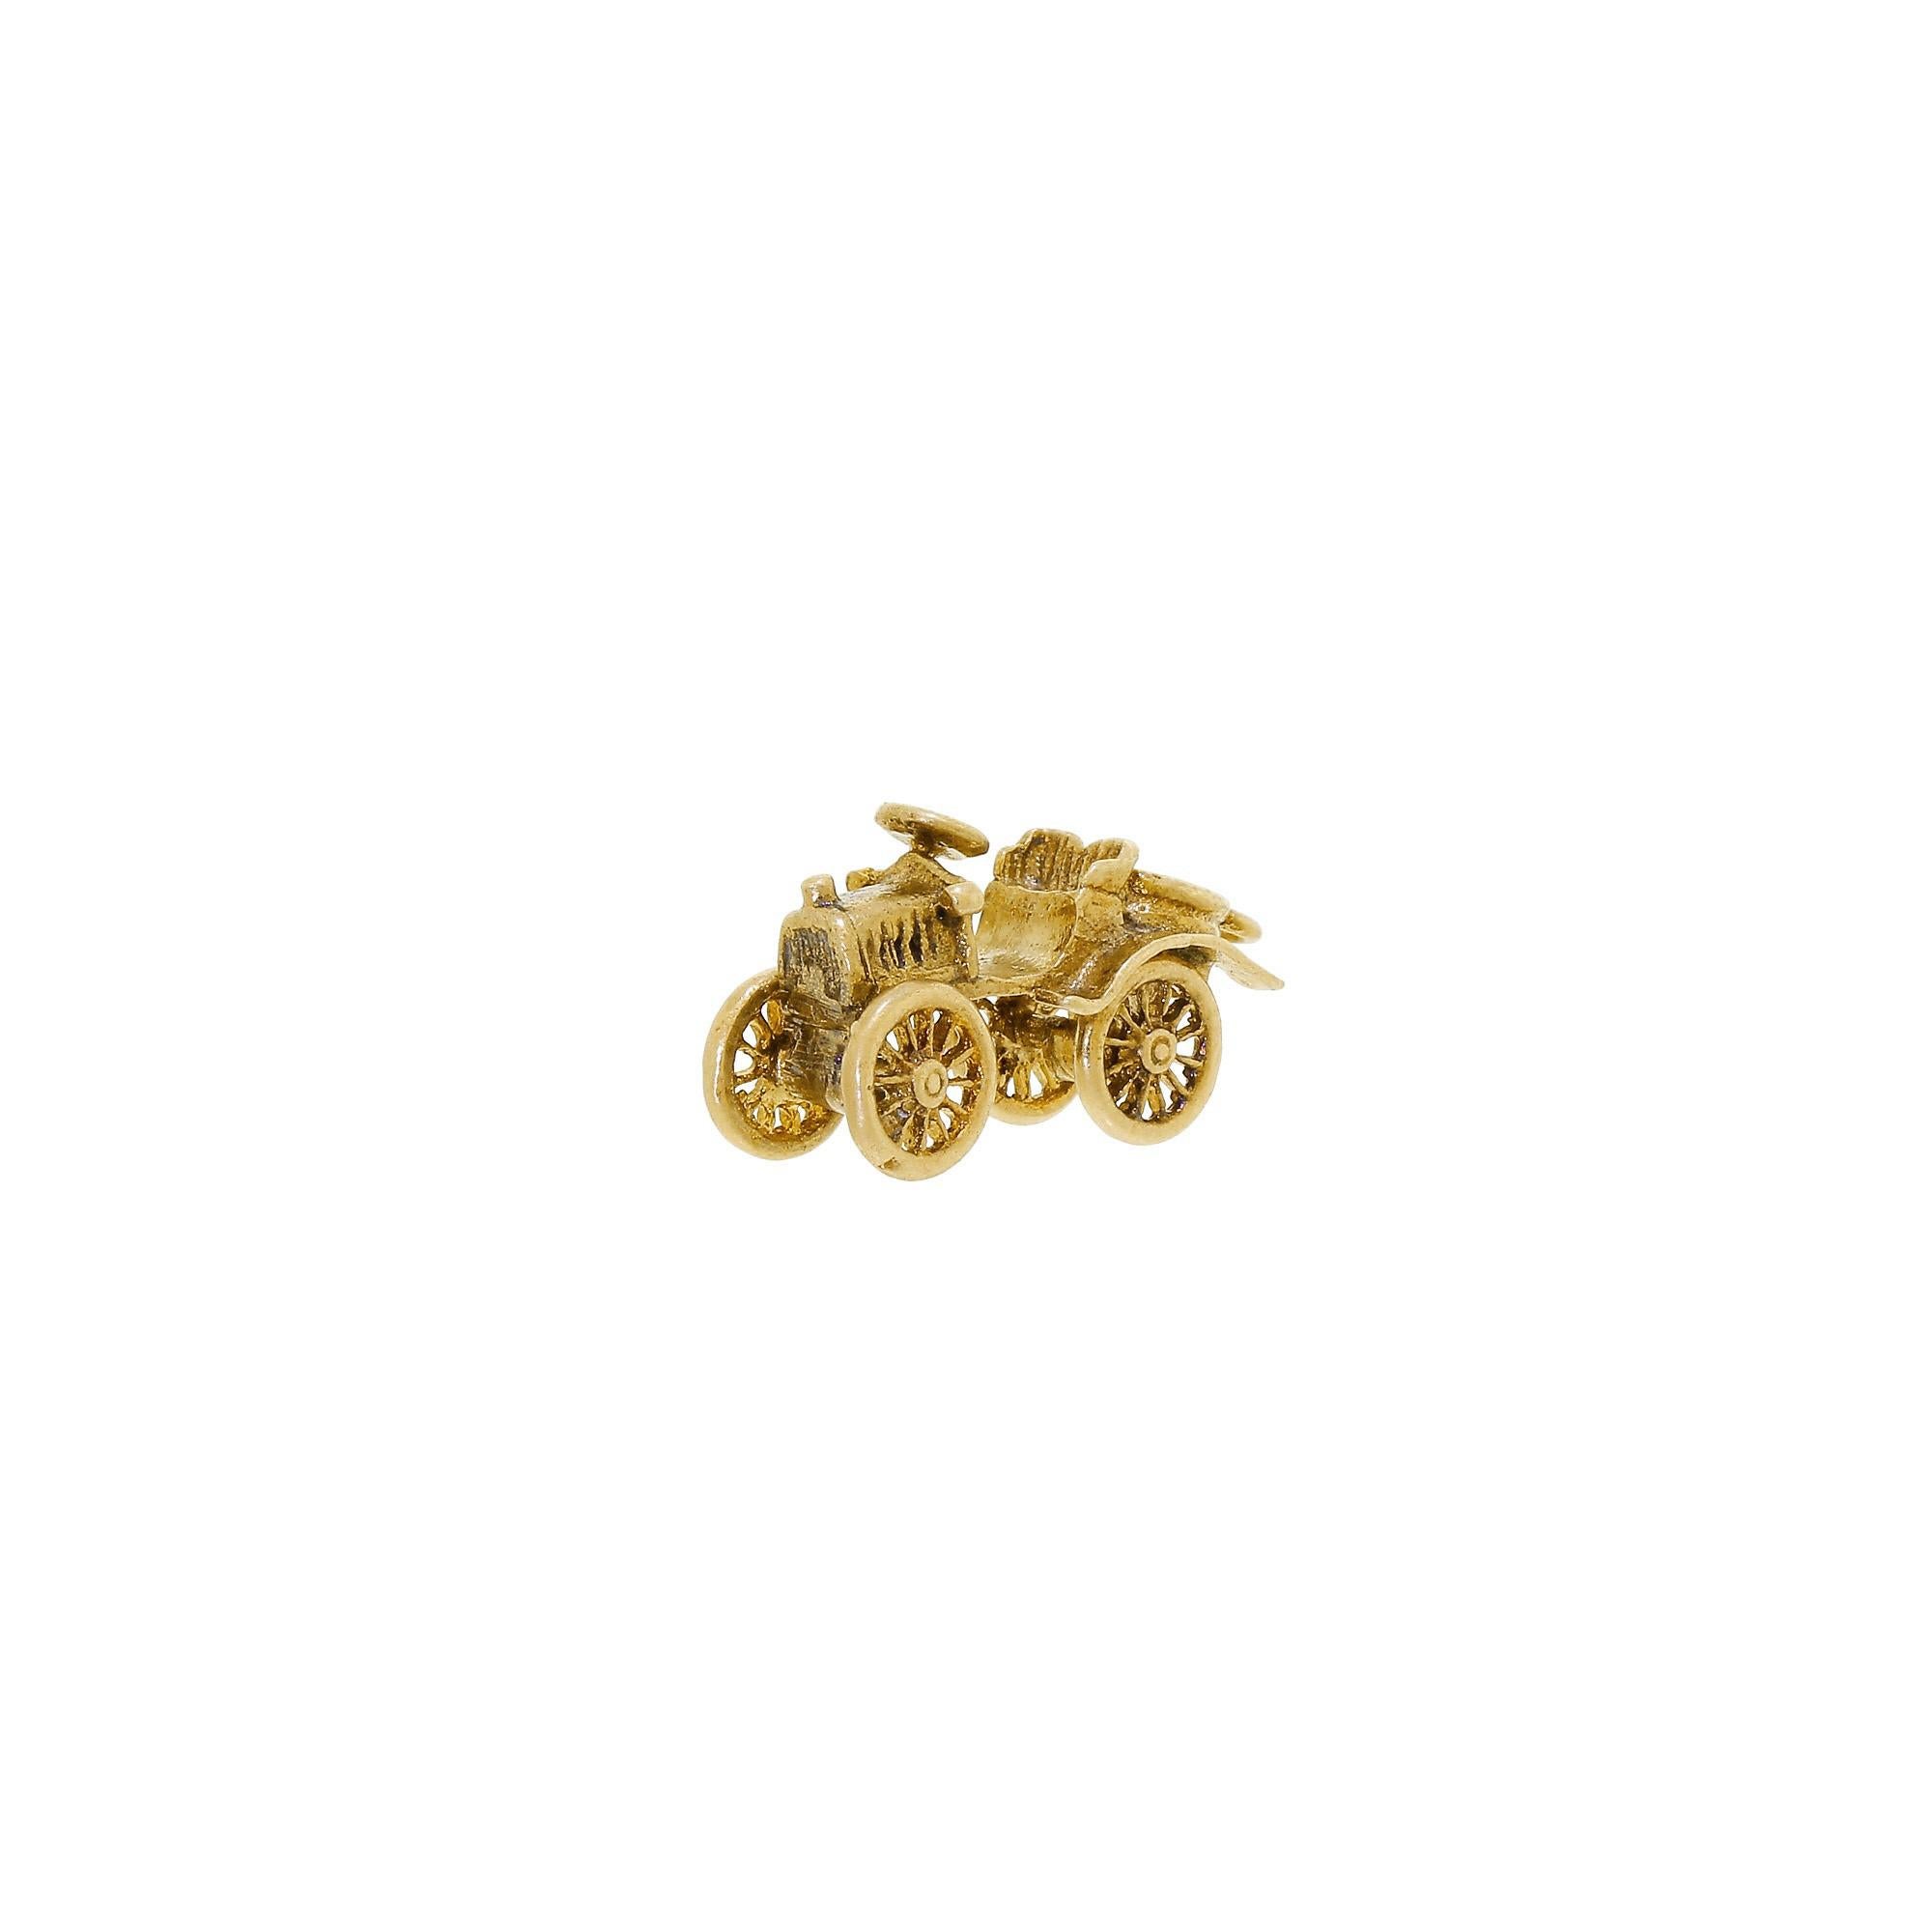 Women's or Men's English 9 Karat Solid Gold Articulated Car Charm Petite 3.5 Gram 9 Carat / 375 For Sale